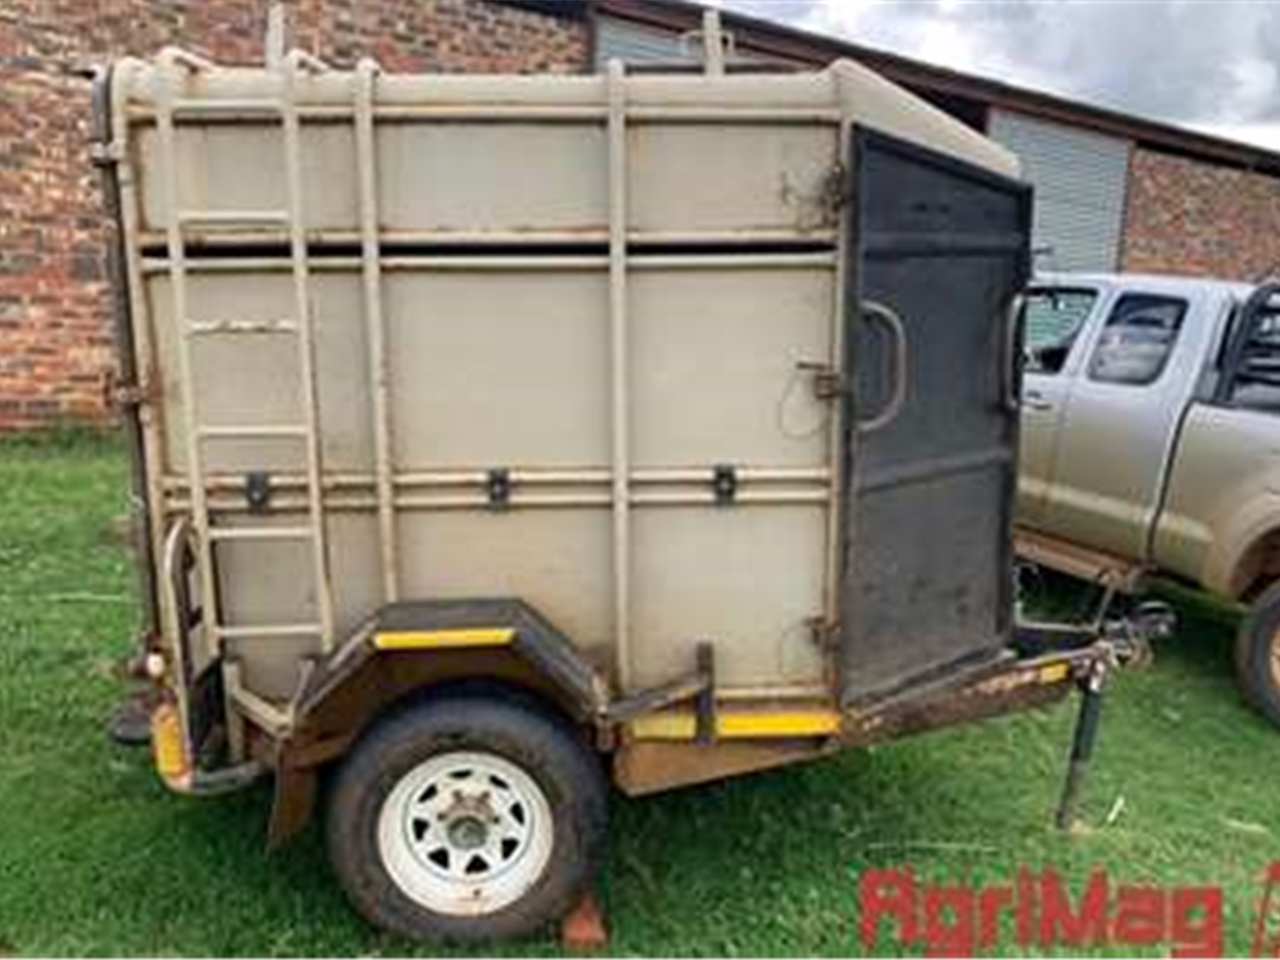 Trailer Trailers 2010 for sale by Agrimag Auctions | Truck & Trailer Marketplaces